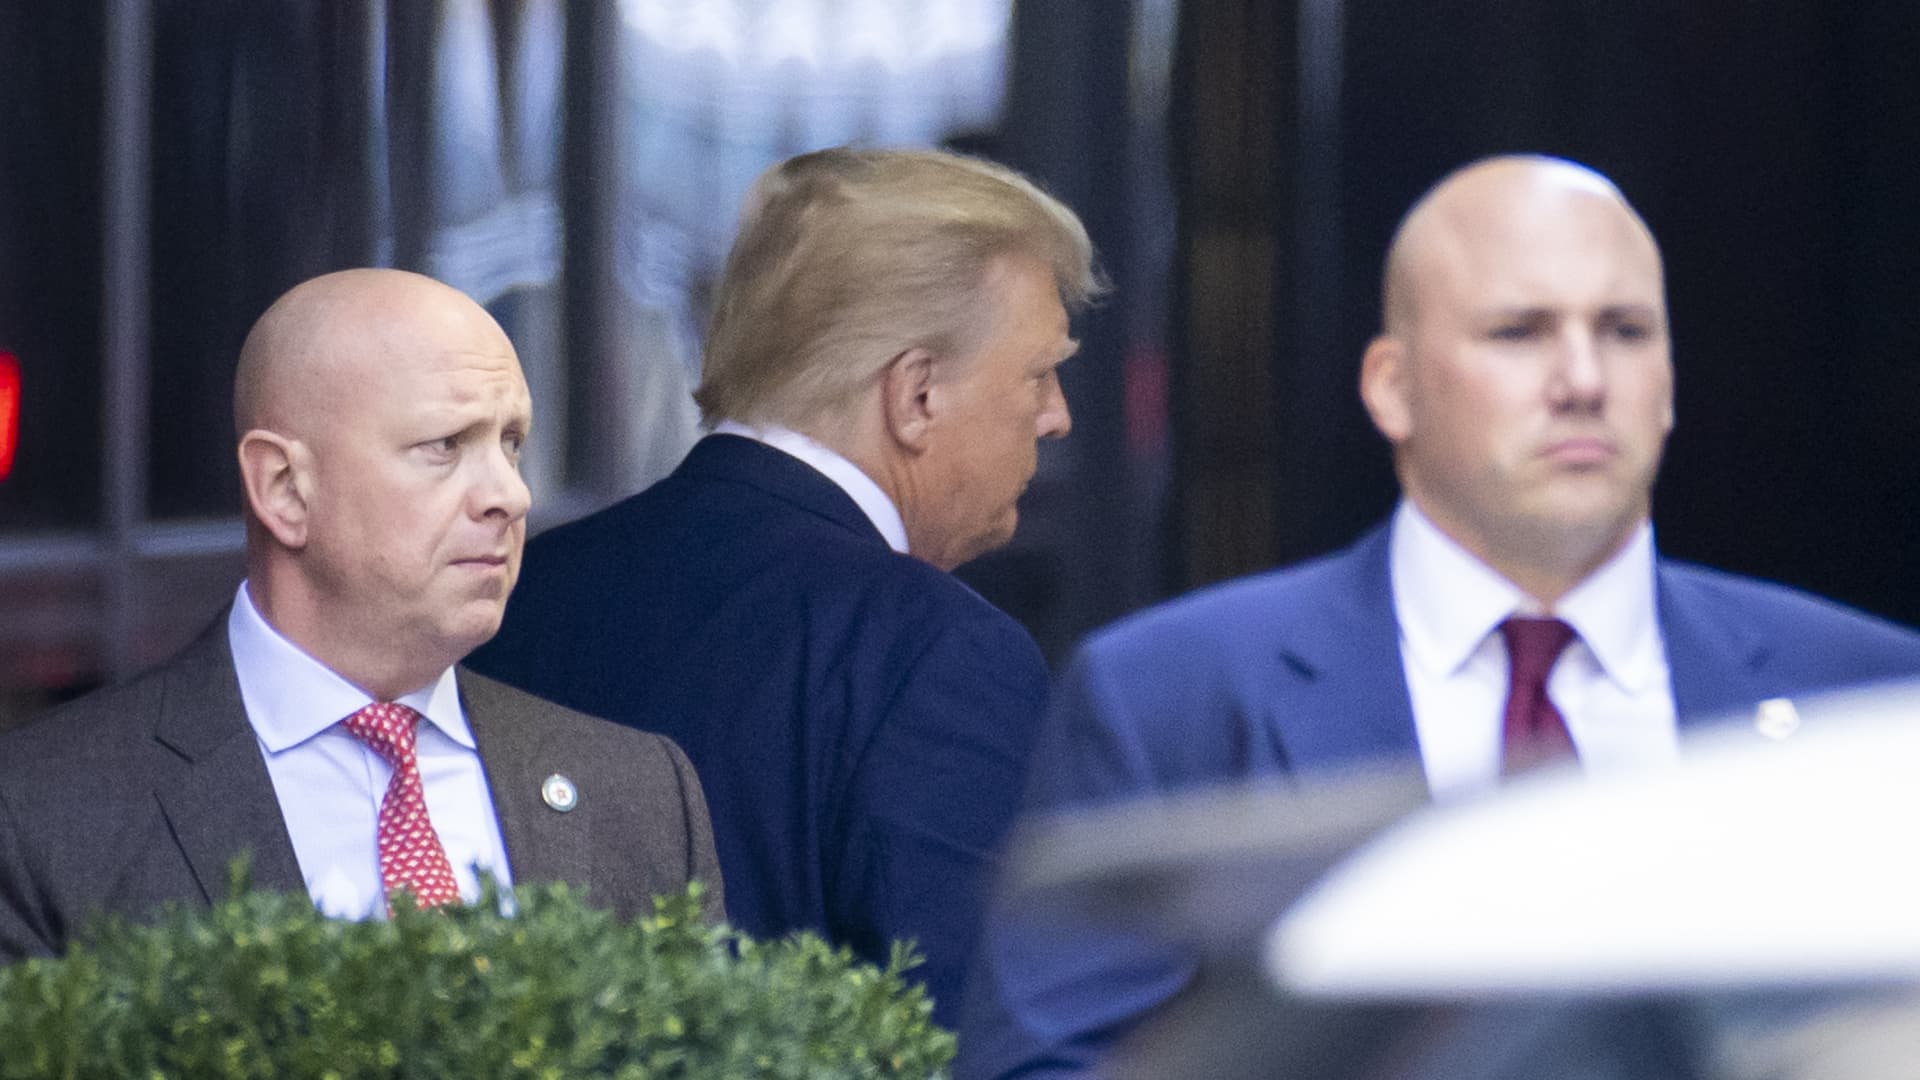 Former President Trump leaves Trump Tower for Manhattan Criminal Court in New York on Tuesday, April 4, 2023. Trump will be booked and arraigned on charges arising from hush money payments during his 2016 campaign.